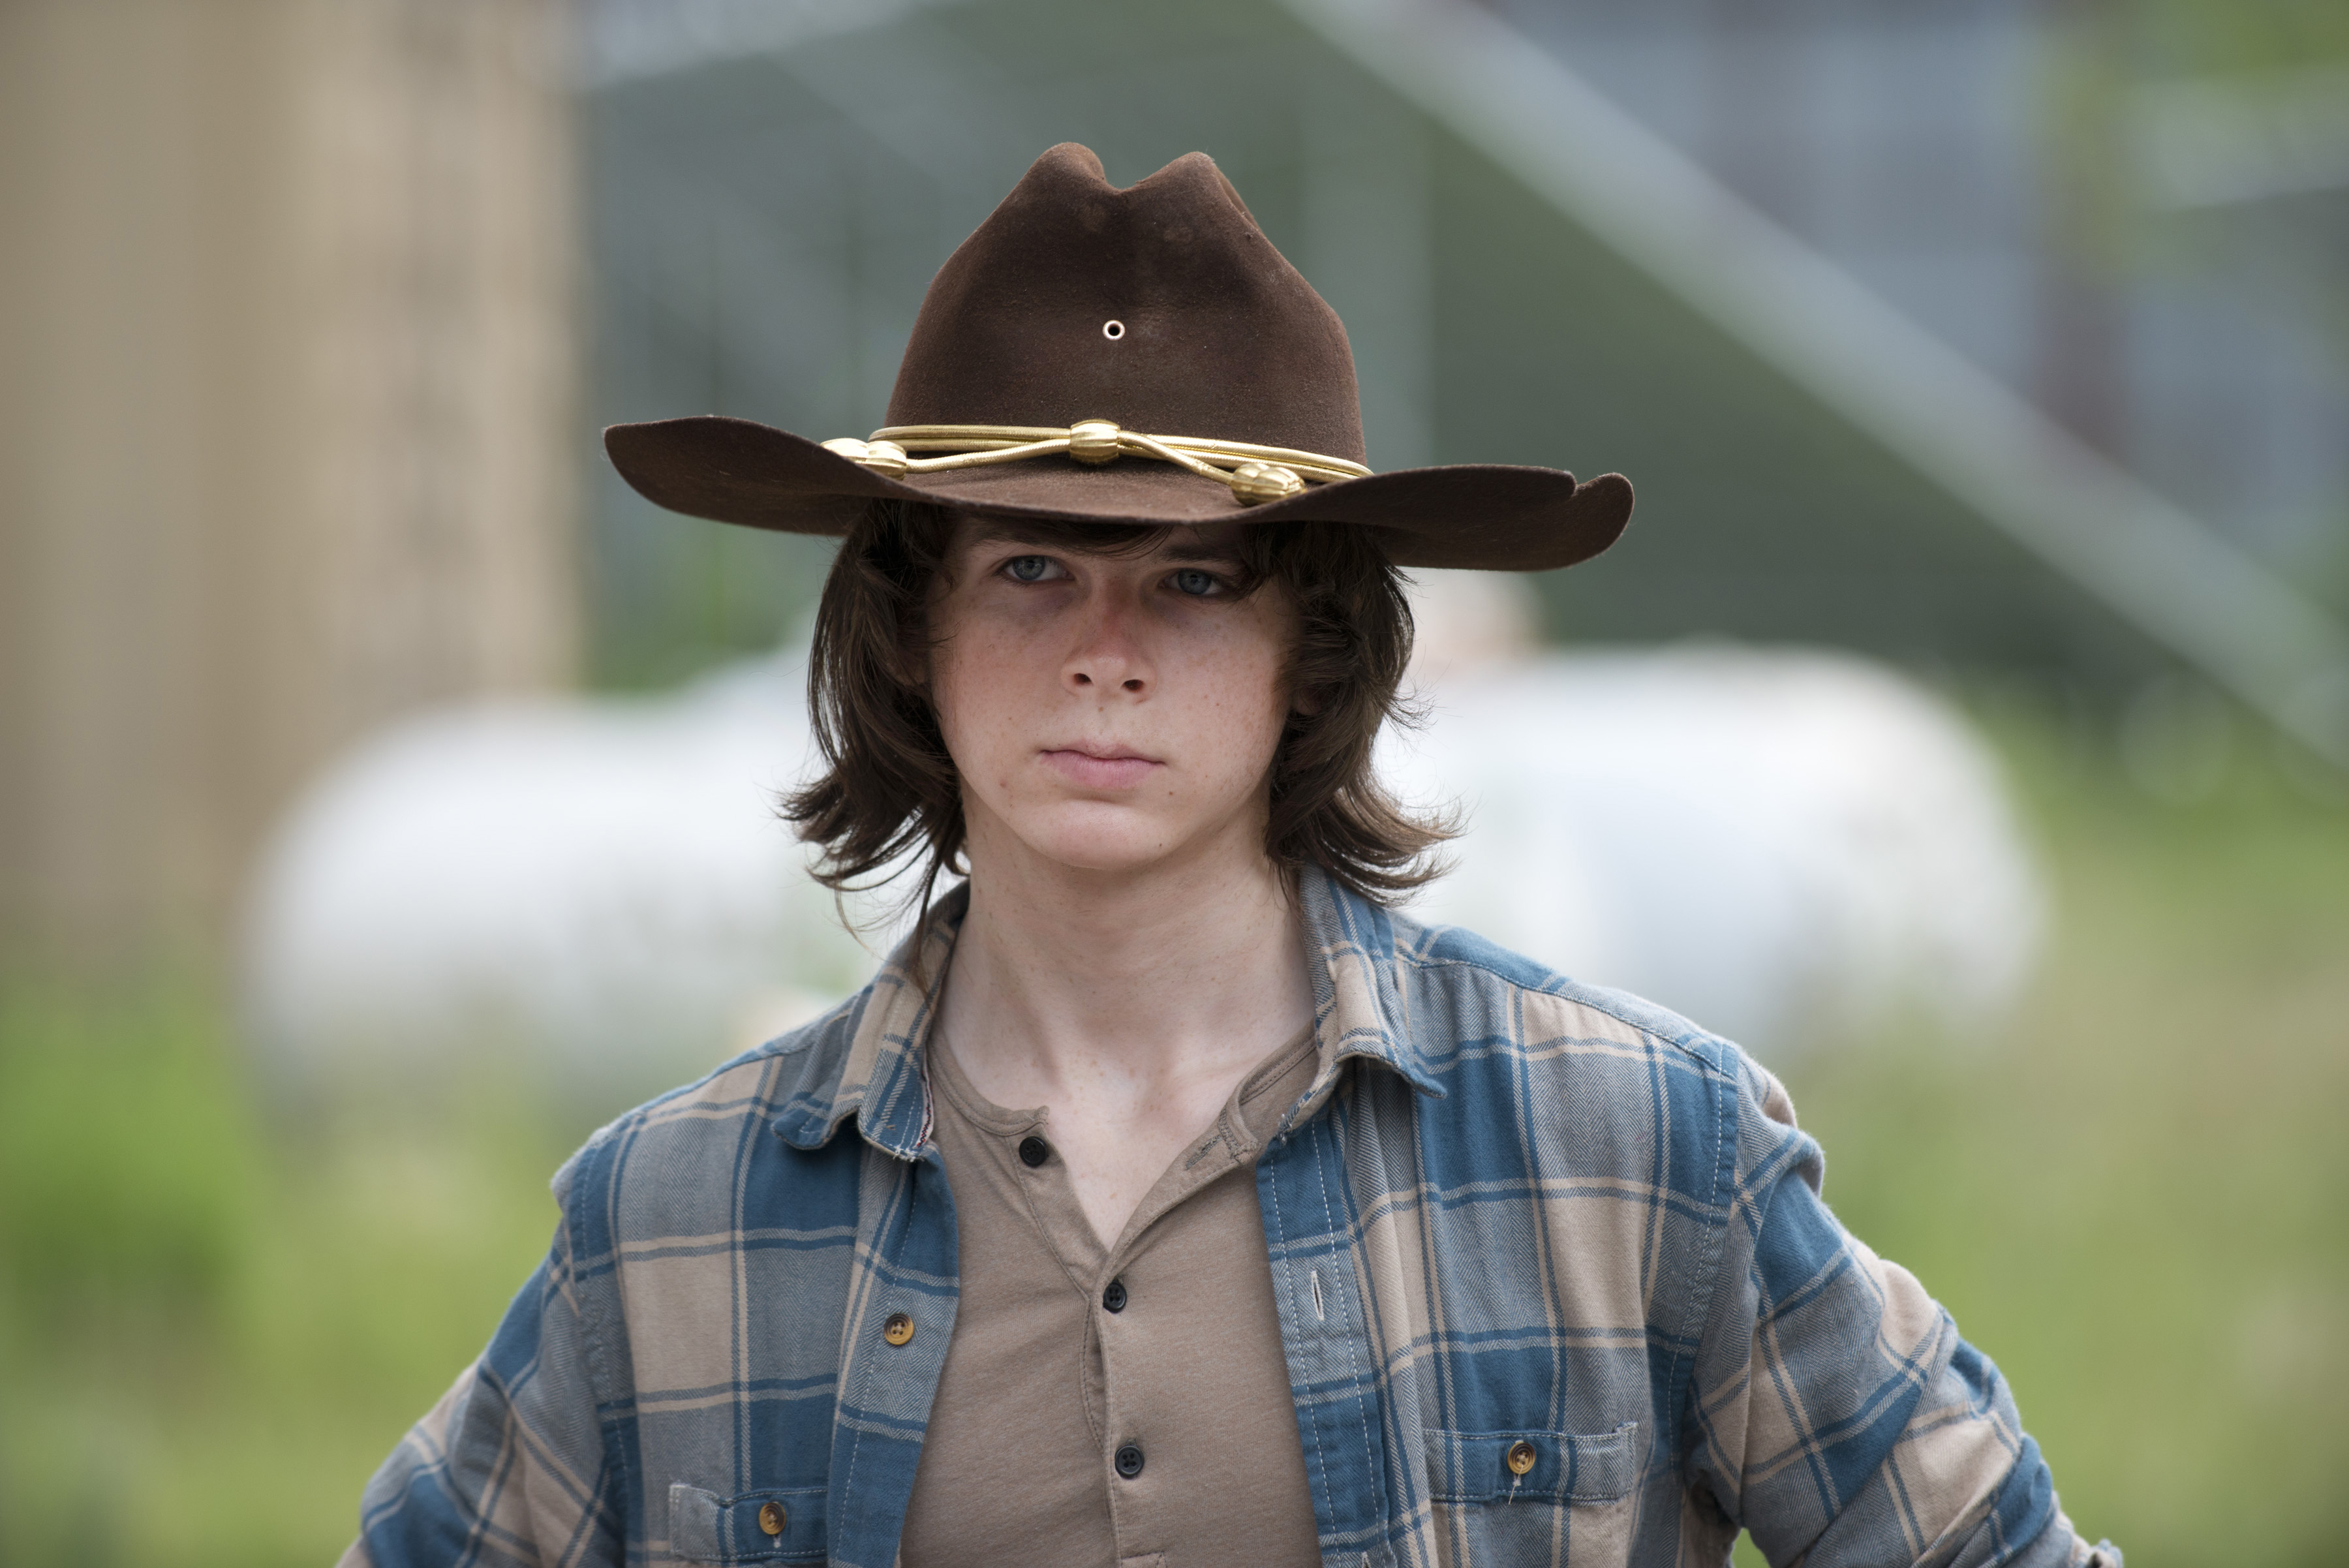 Chandler Riggs Of The Walking Dead Shares His Playlist Via Reddit